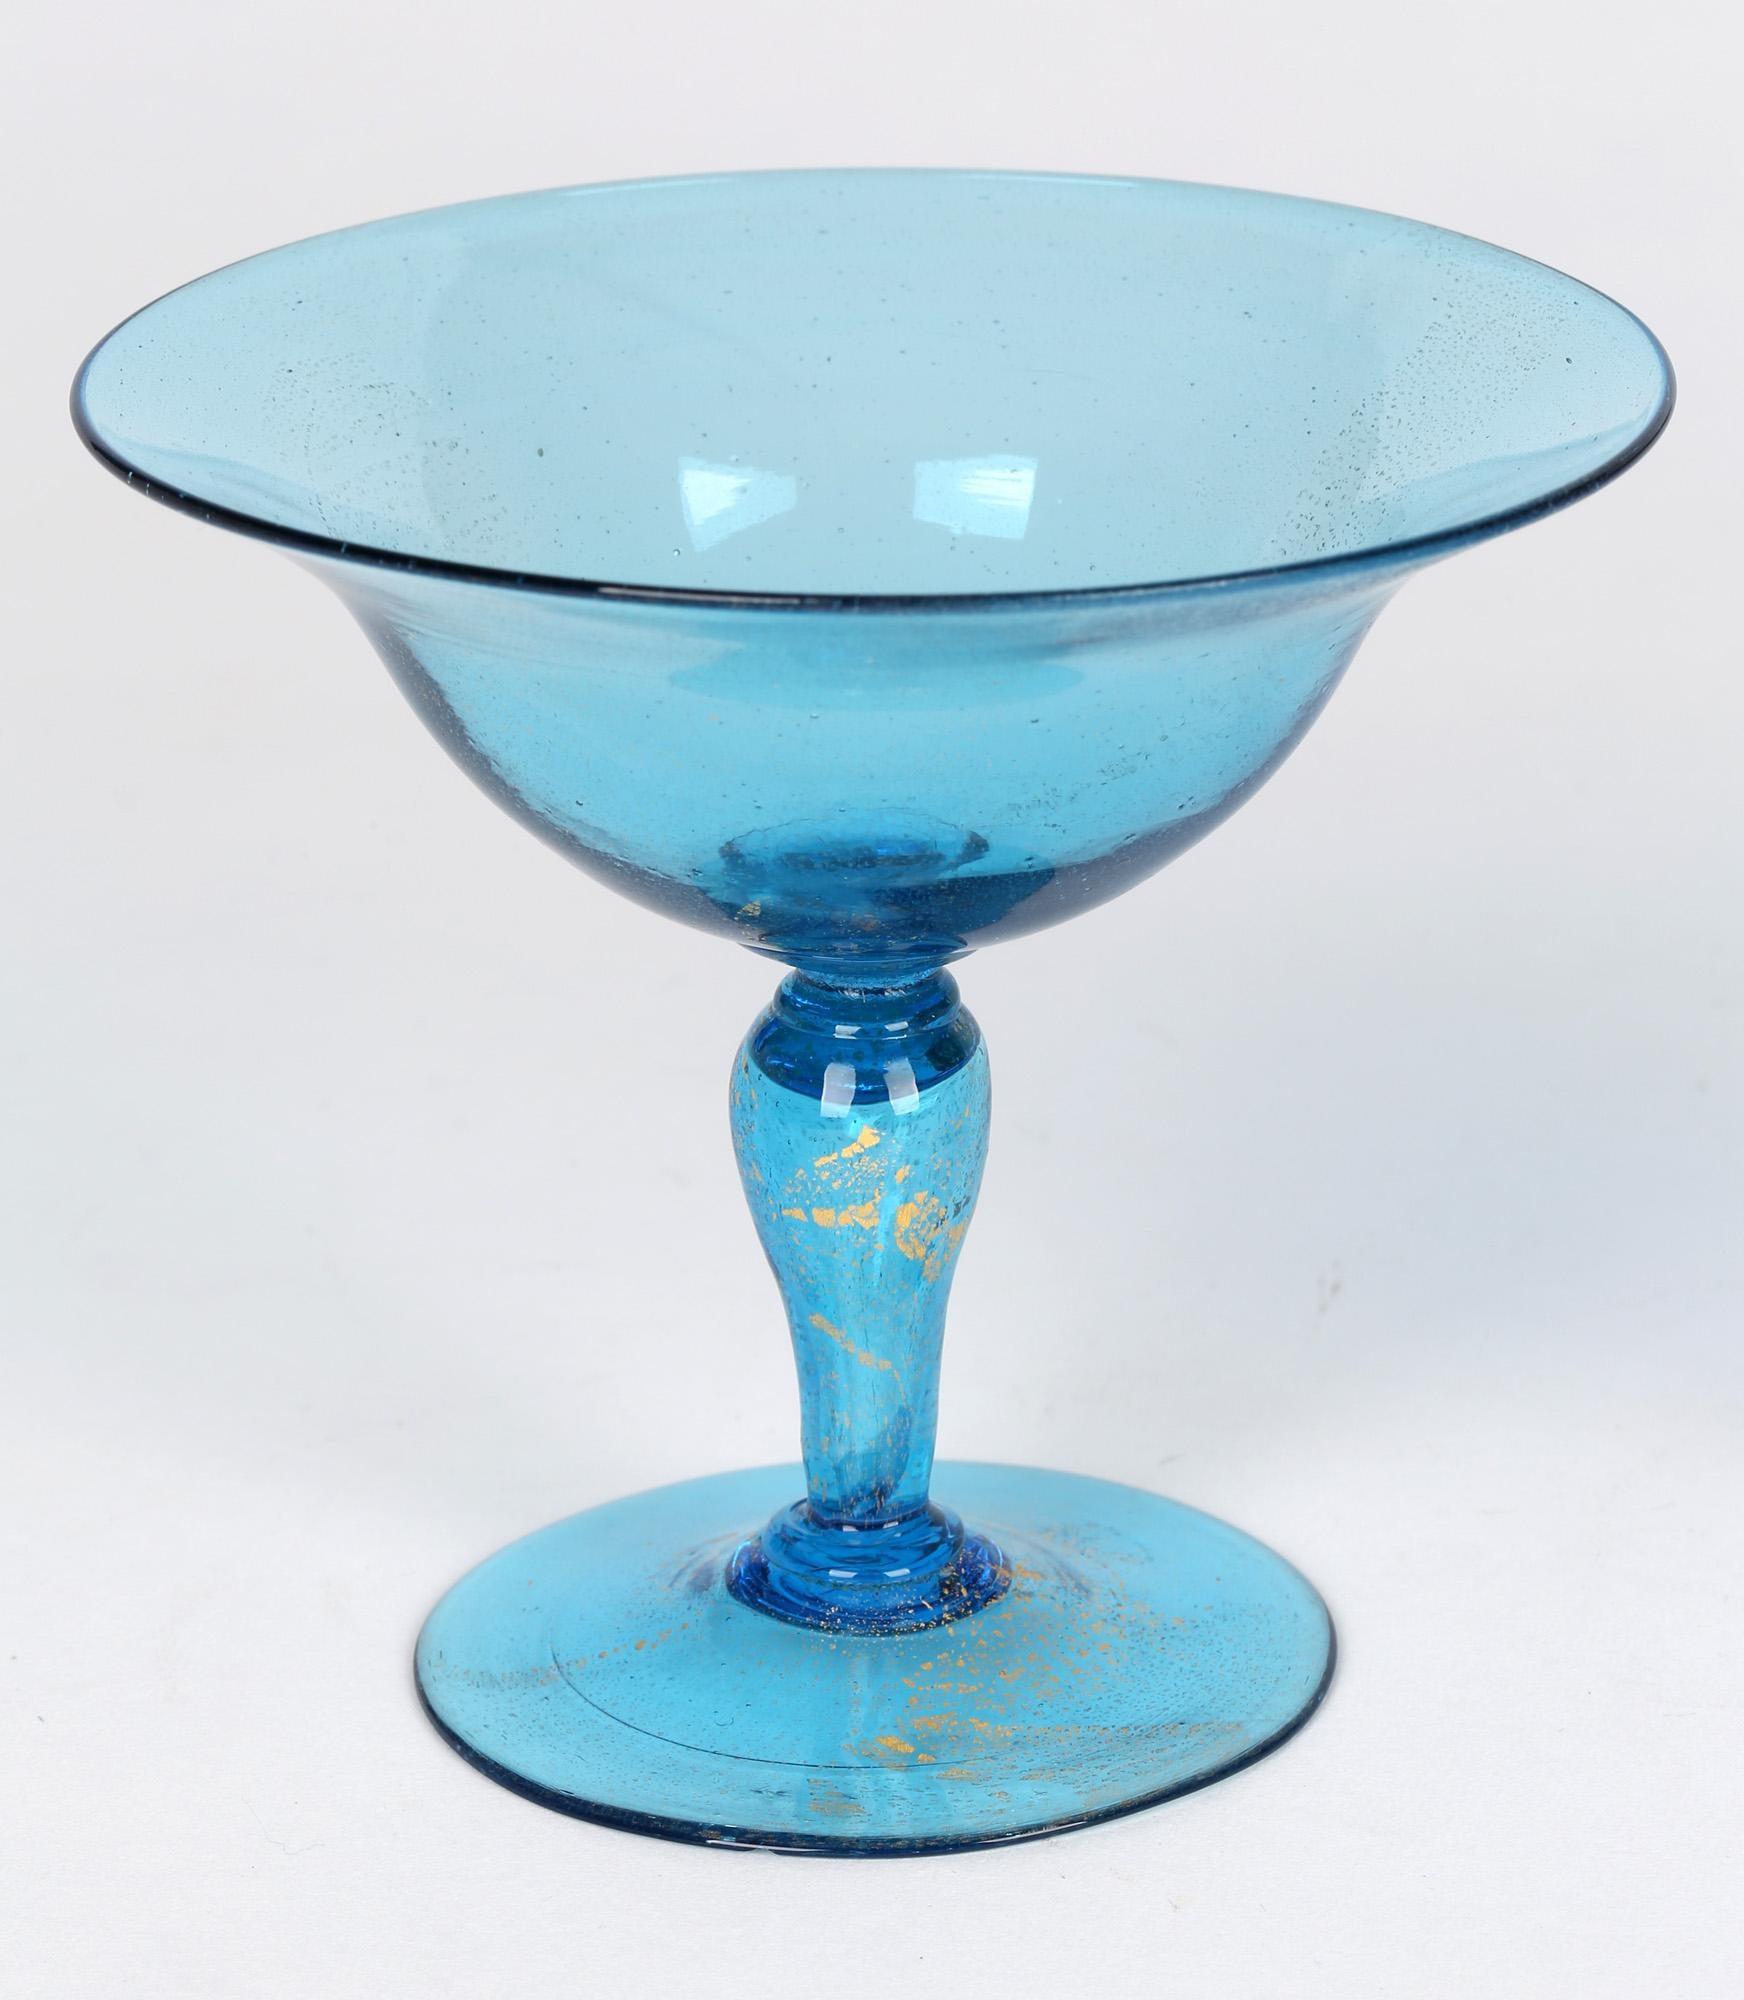 A fine pair of Murano Venetian revival art glass champagne glasses by Antonio Salviati and dating from the early 20th century. The glasses stand on a slightly domed rounded foot with a hollow blown knop stem and with a wide open tapering bowl. The